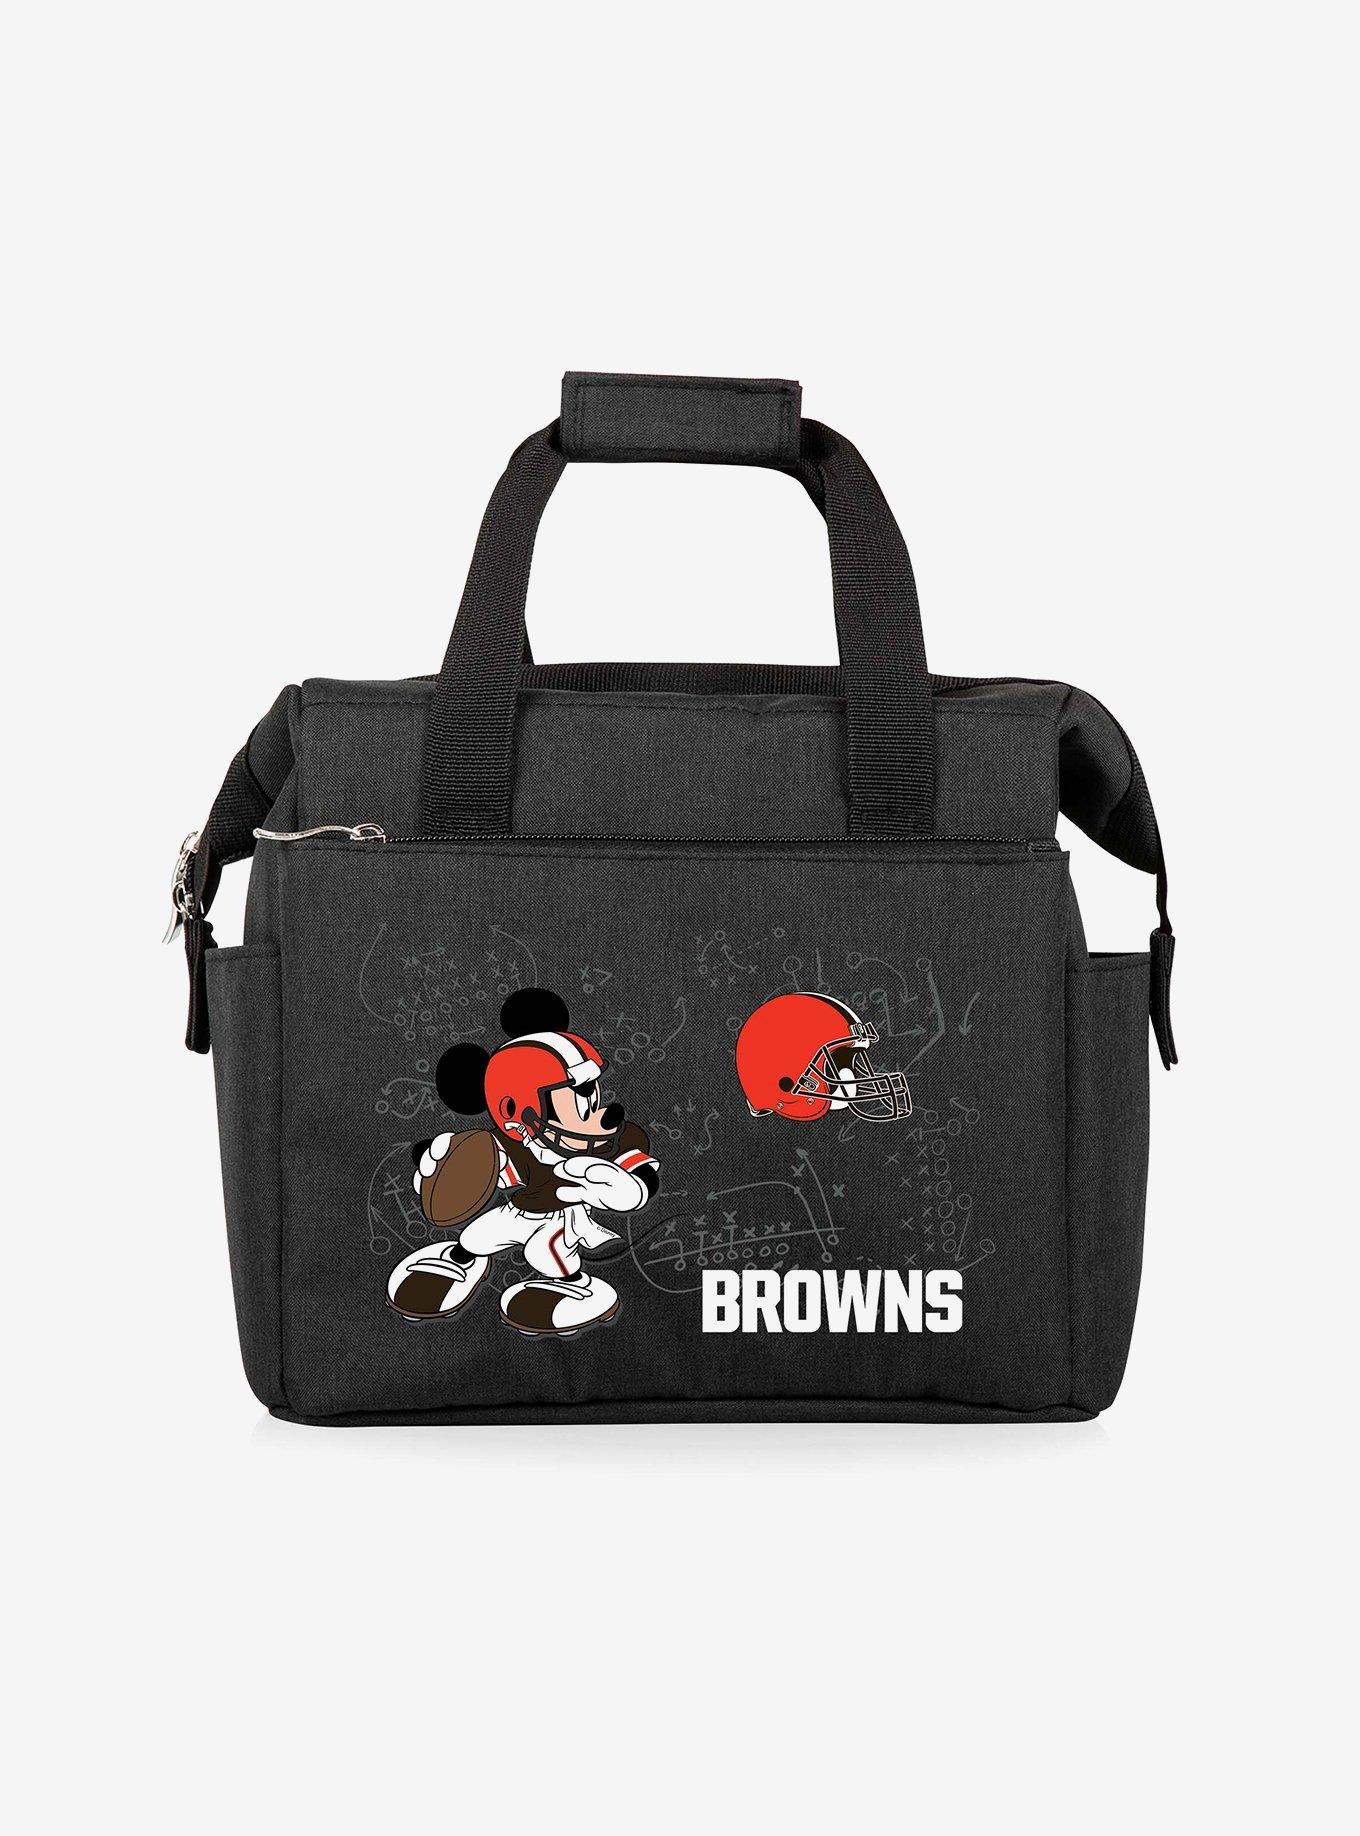 Cleveland Browns Gifts Under $150, Browns Collectibles, Browns